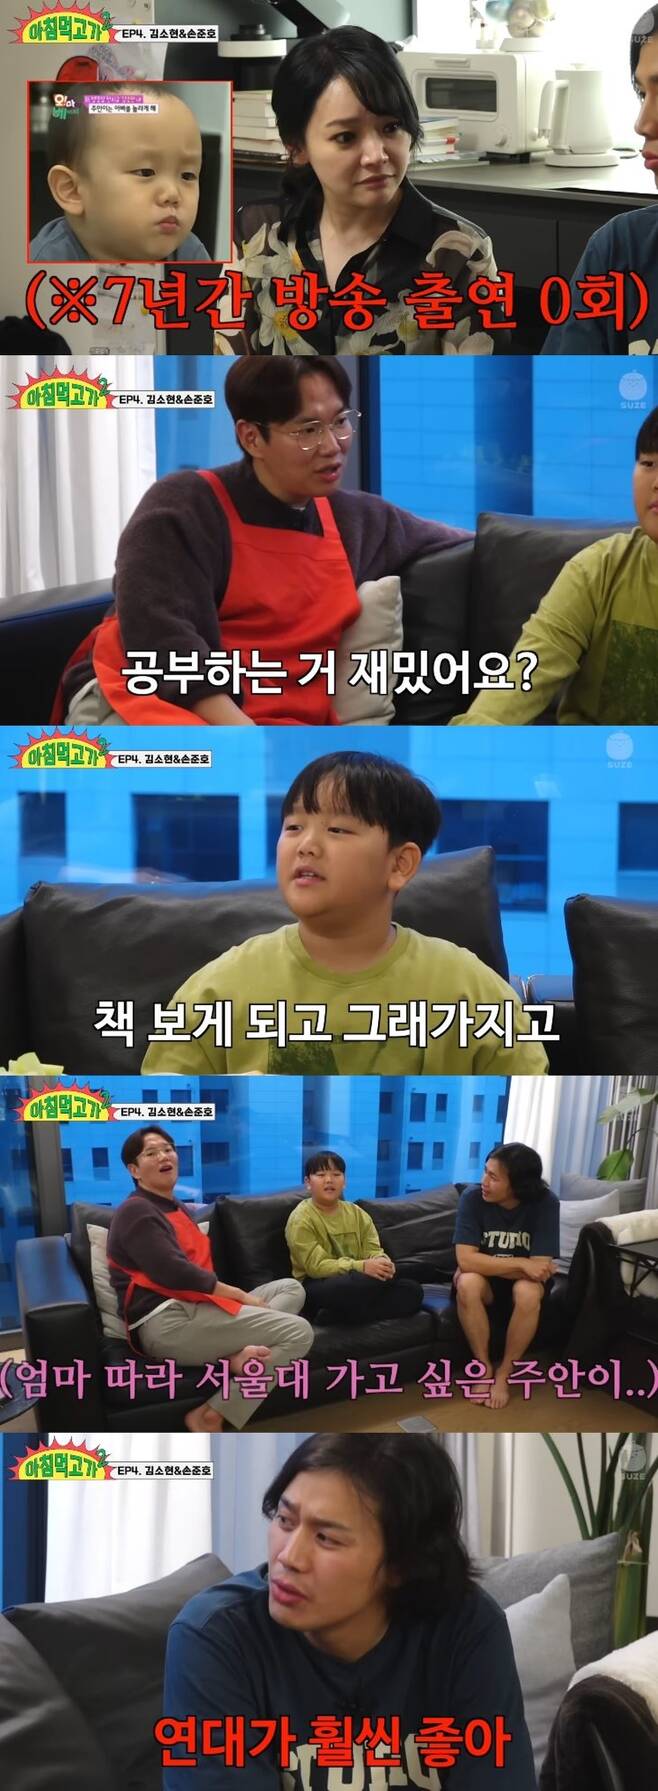 Hyun Jyu-ni, son of musical actor couple Kim So-hyun and Son Jun-ho, said Seoul National University was the target.On November 28, Funny Things Come Up channel posted Morning Eat 2 video titled Kim So-hyun Son Jun-ho Houses in Koreas Best Luxury Apartment.On this day, Jang Sung-kyu woke up Kim So-hyun and Son Jun-ho and had breakfast, while his son Hyun Jyu-ni woke up.Hyun Jyu-ni has appeared on the show for the first time in seven years since the entertainment show Oh My Baby. It appeared on the screen much more grown up than in the past.Jang Sung-kyu asked Hyun Jyu-ni, I know that Hyun Jyu-ni is very good at studying. Is it fun to study?Hyun Jyu-ni replied, Yes, and said, I just suddenly became interested (in studying). I did so after reading a book.Jang Sung-kyu then asked Hyun Jyu-ni about the university he was aiming for, saying that Seoul National University was the goal, Because my mom went too.Son Ho-jun, a graduate of Yonsei University, said, The solidarity is much better, drawing laughter.On the other hand, Kim So-hyun is married to Son Jun-ho, an 8-year-old son, in 2011, and has his son Hyun Jyu-ni.Kim So-hyun has appeared on MBC Radio Star in the past and has said that her father, doctor, opera singer mother, sister and younger brother are all from Seoul National University.At the time, MCs asked, Is my husband Son Jun-ho a Seoul National University? She laughed in a small voice saying, My husband is a solidarity.